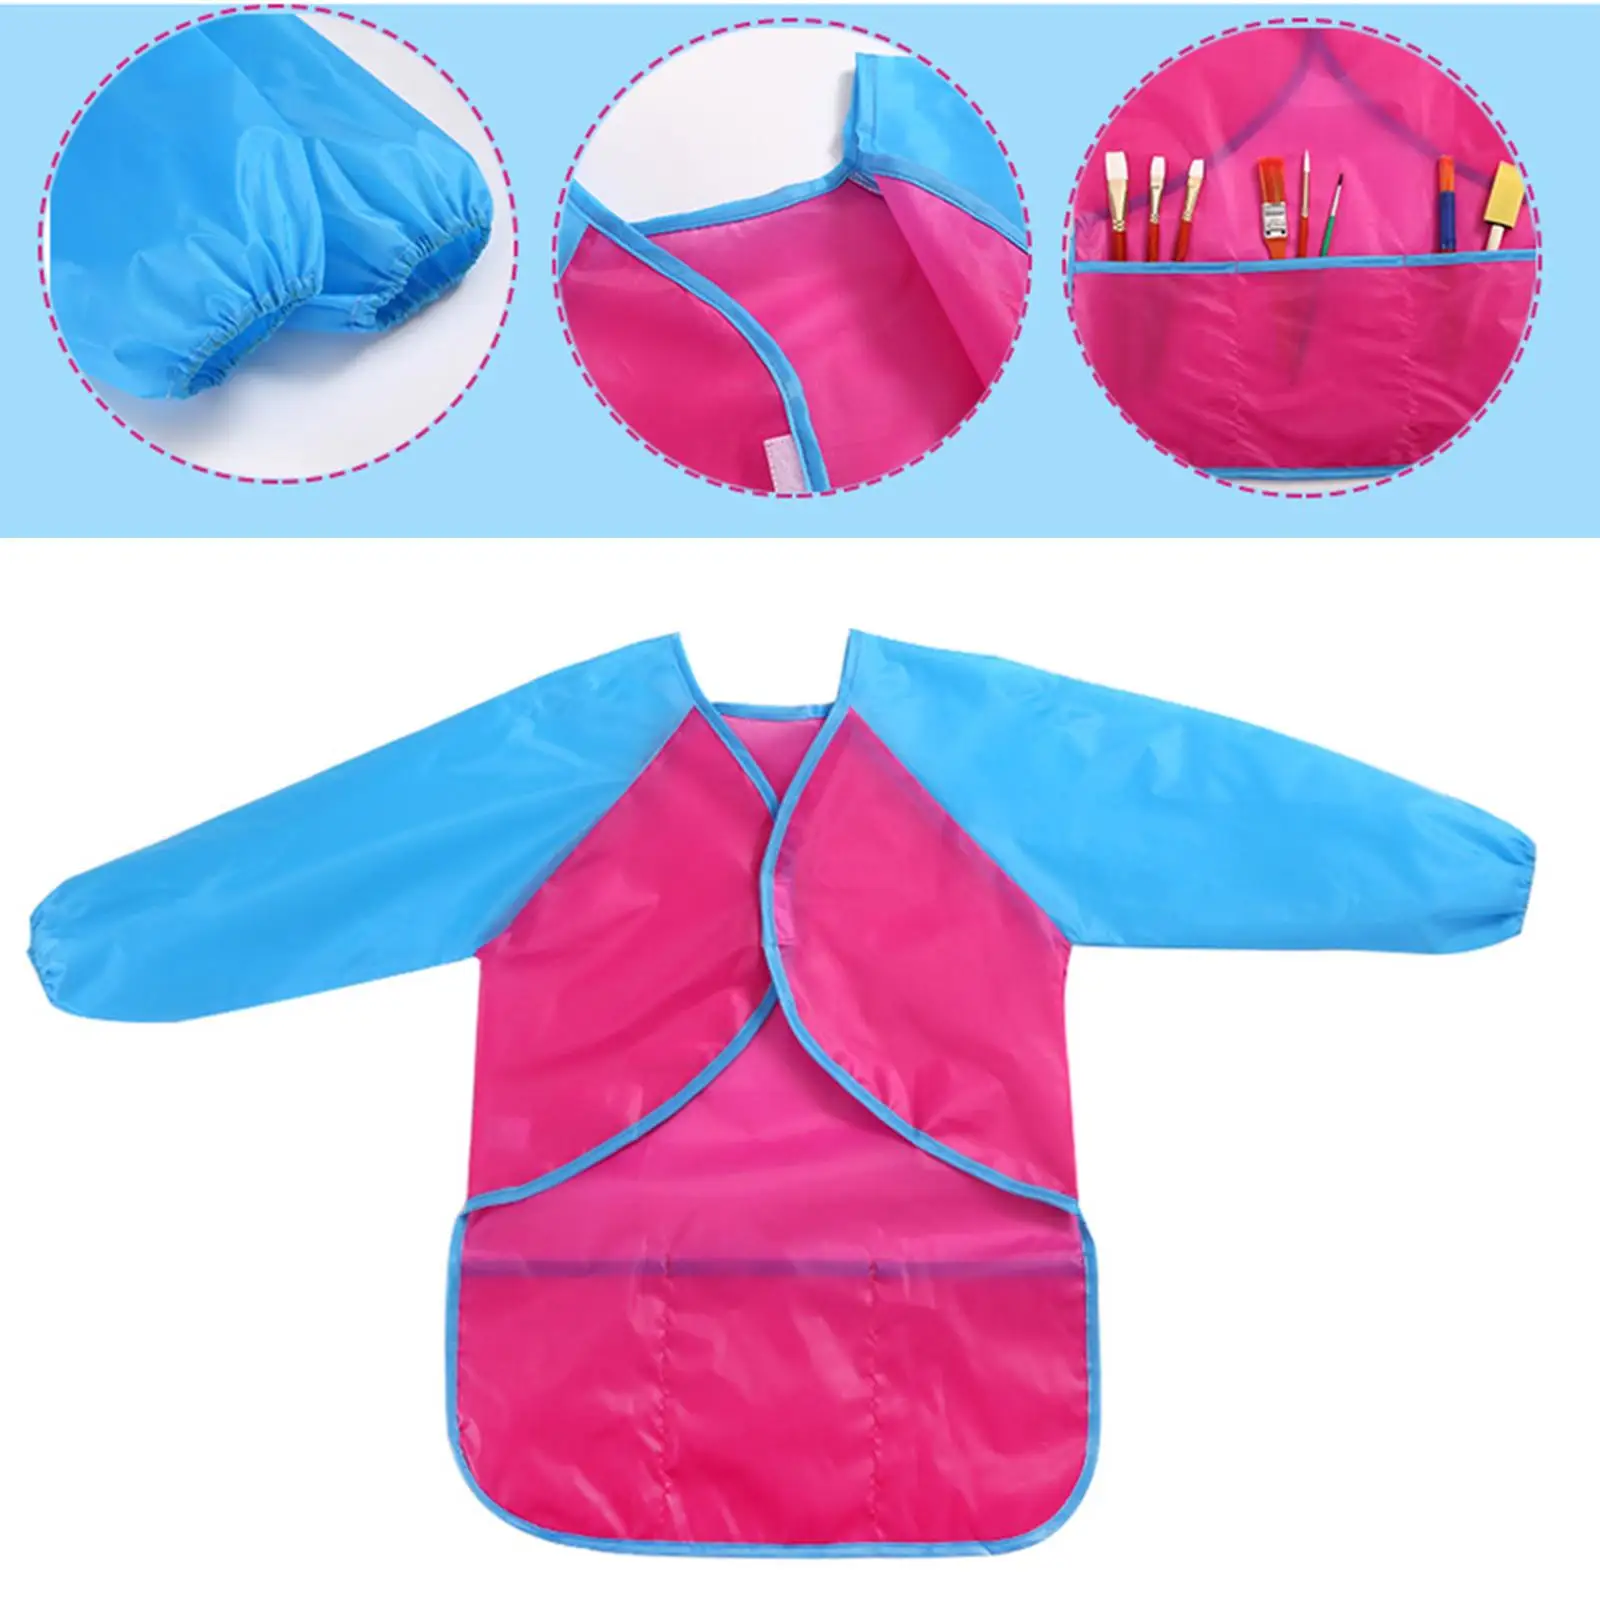 Long Sleeve Art Apron with 3 Pocket Waterproof for Girls Boys Infant Baby